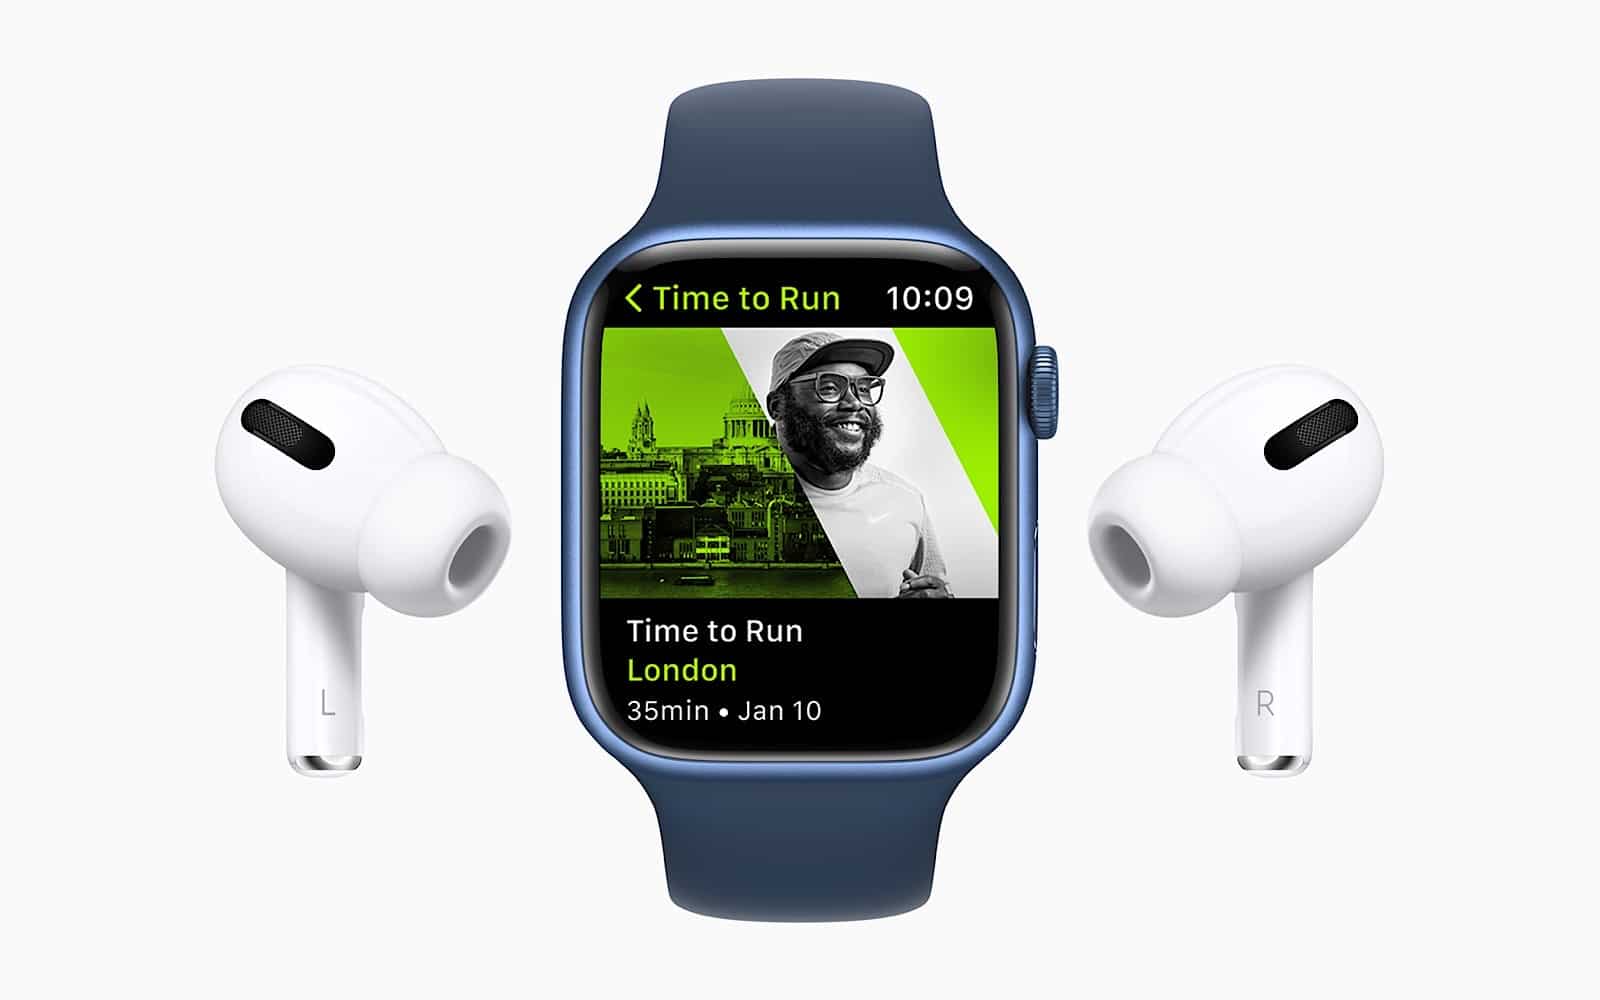 Apple's addition of "Time to Run"